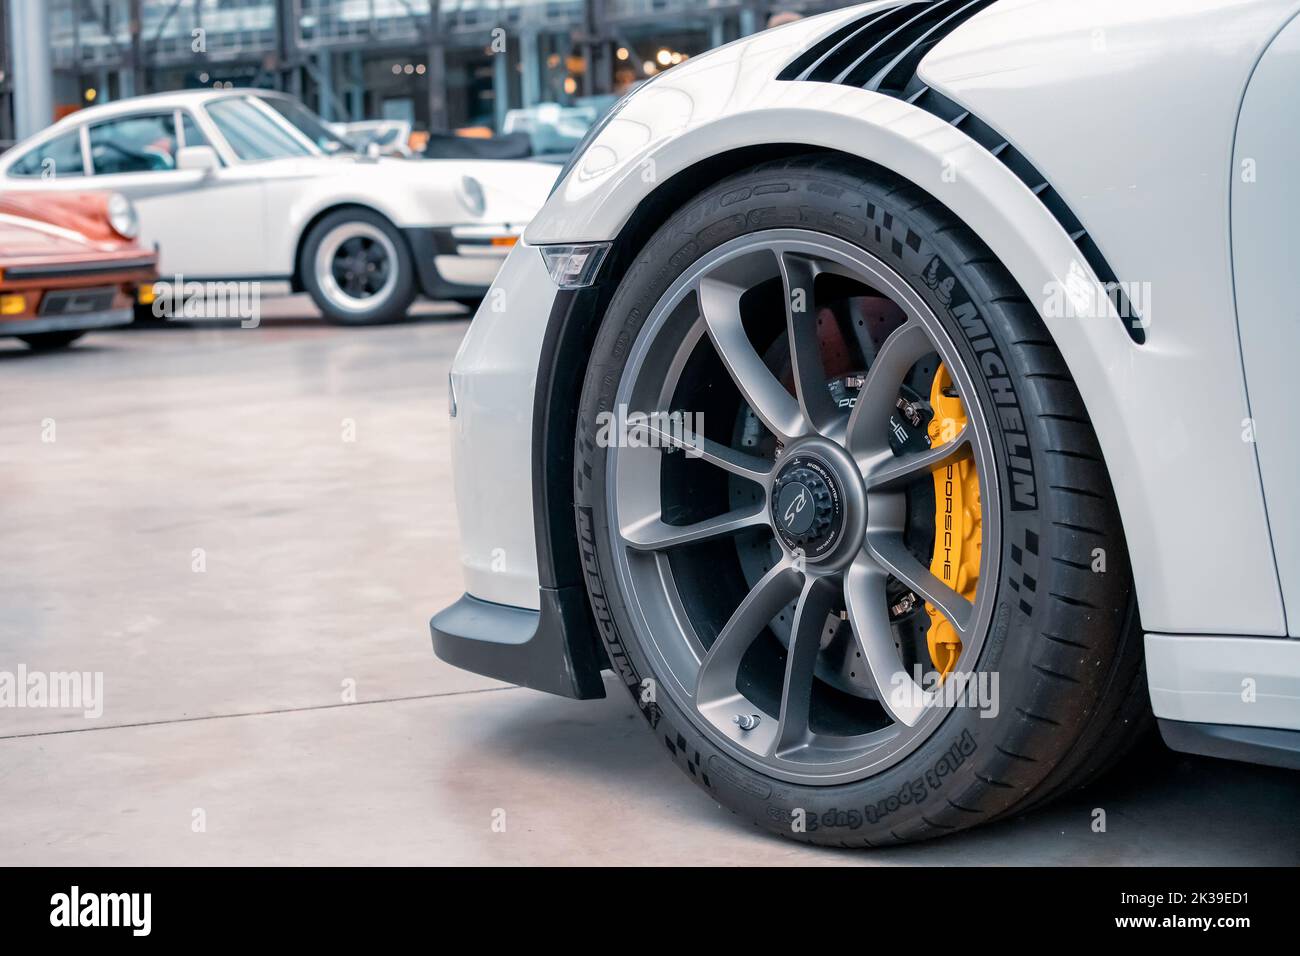 21 July 2022, Dusseldorf, Germany: The wheel and tire of a luxury Porsche sports car with a powerful braking system and discs. Stock Photo